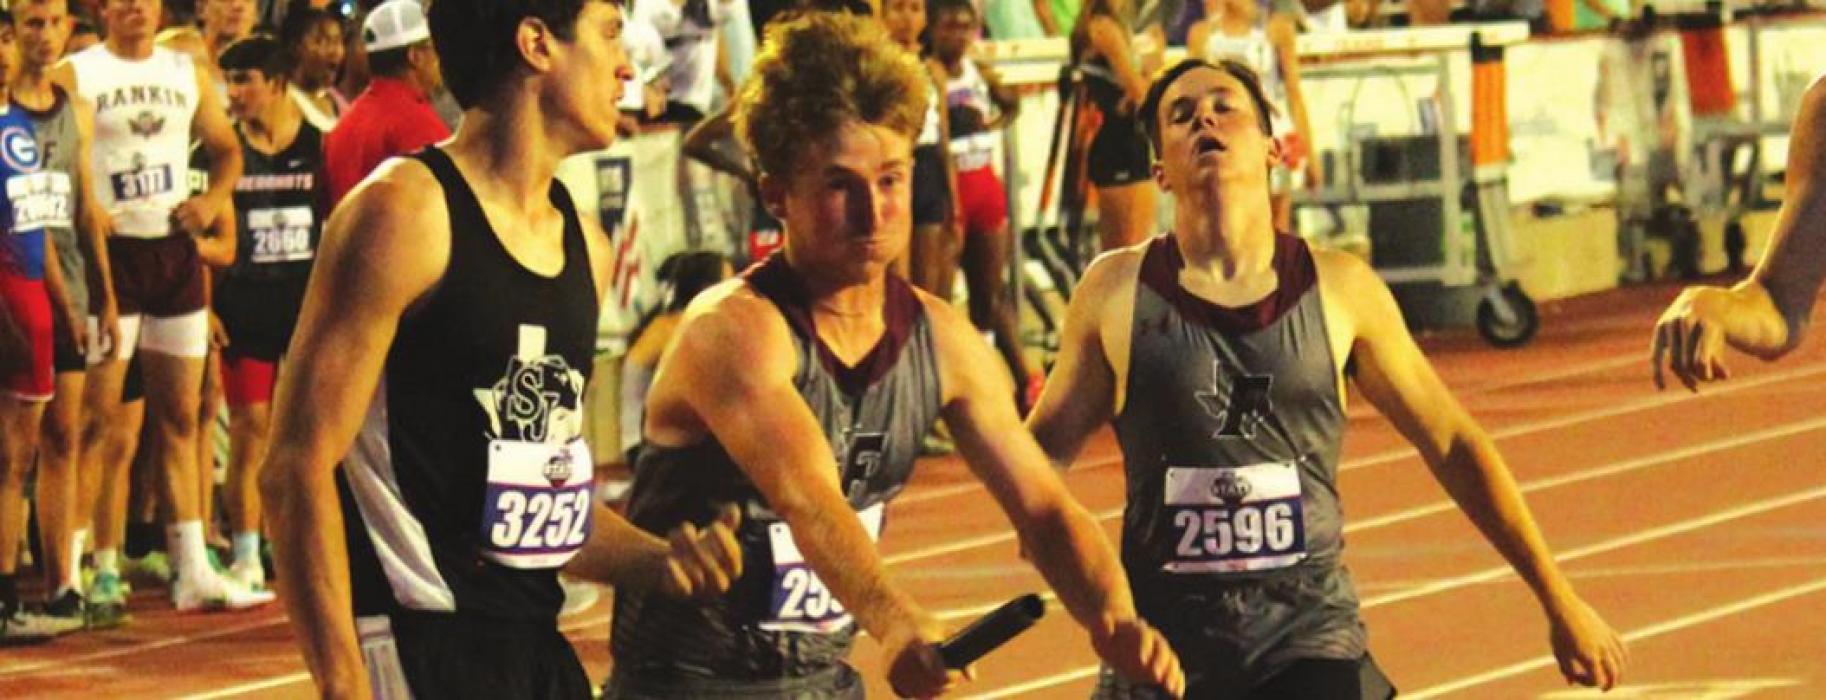 Reid Gross hands off to Logan Fritsch at Fayetteville’s first exchange of the 1A boys 4x400 relay. Fayetteville placed fifth with a school record time of 3:31.23. Photo by Jeff Wick